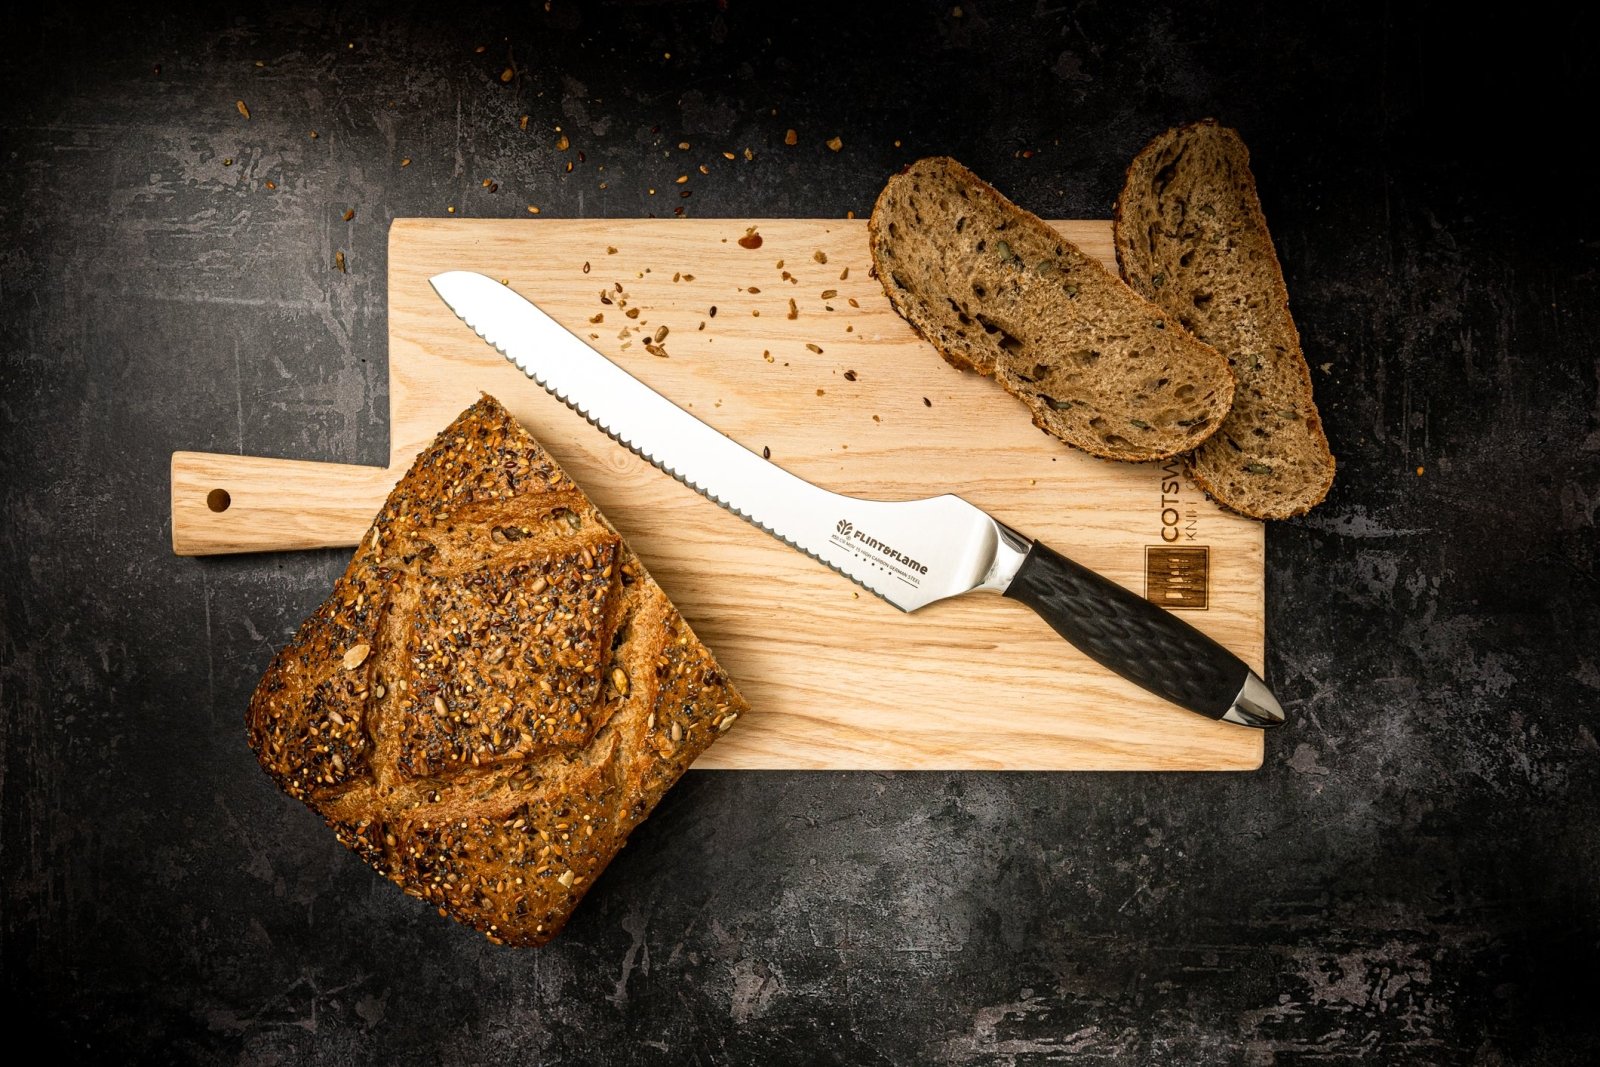 Flint & Flame Pro Series 9" Offset Bread Knife - PS-9OFFSET-BP - The Cotswold Knife Company